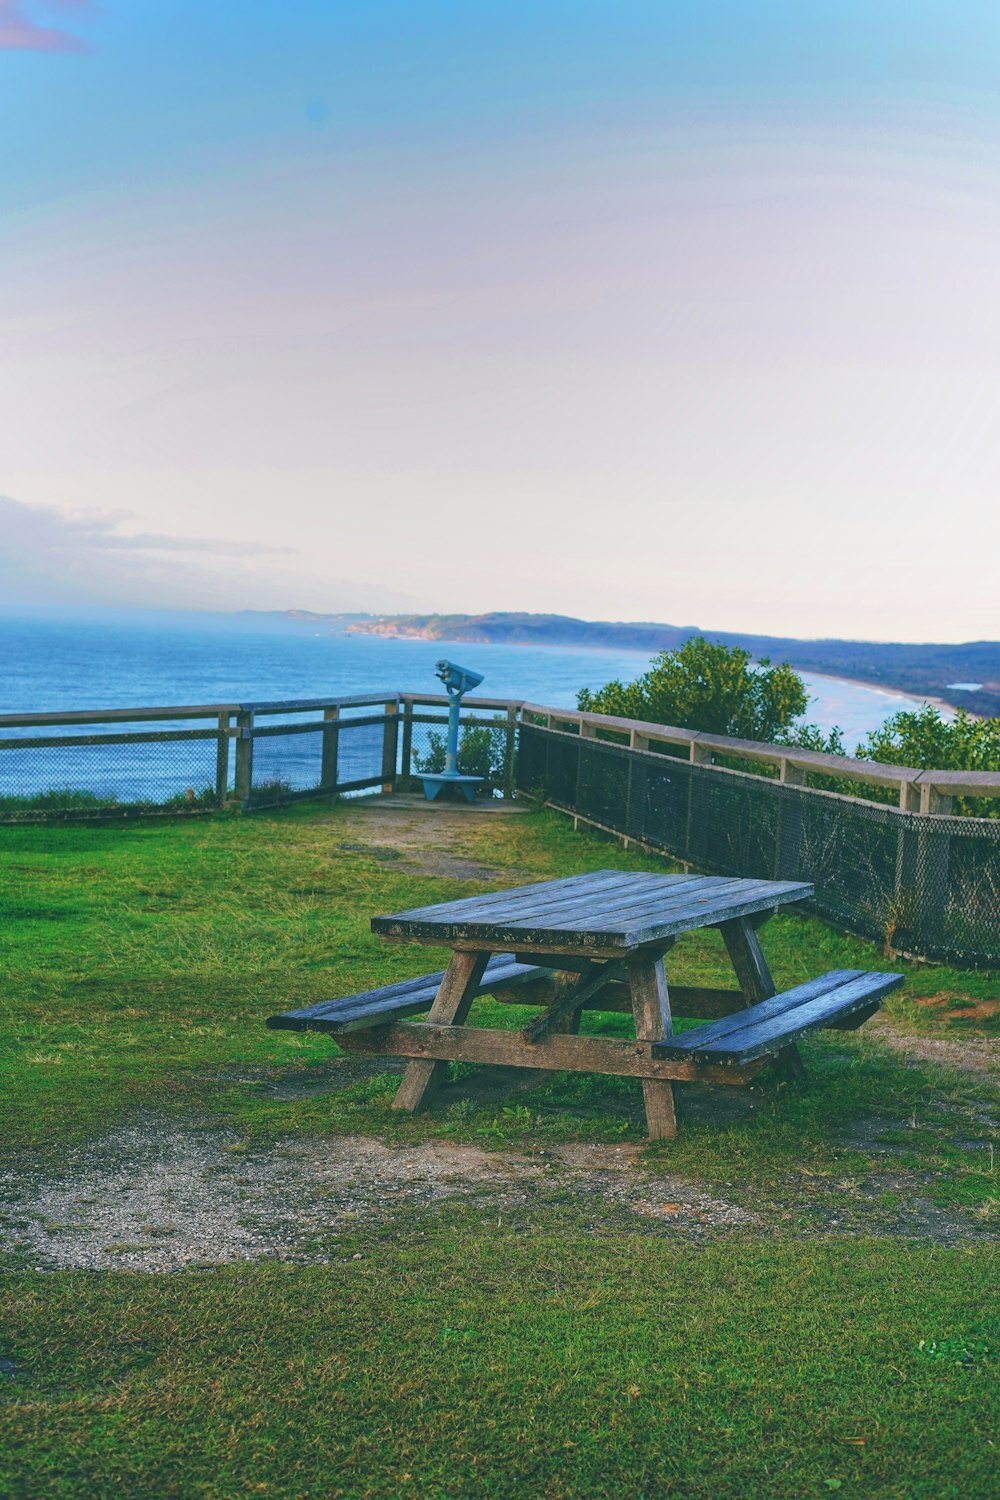 a picnic table on a grassy hill overlooking a body of water